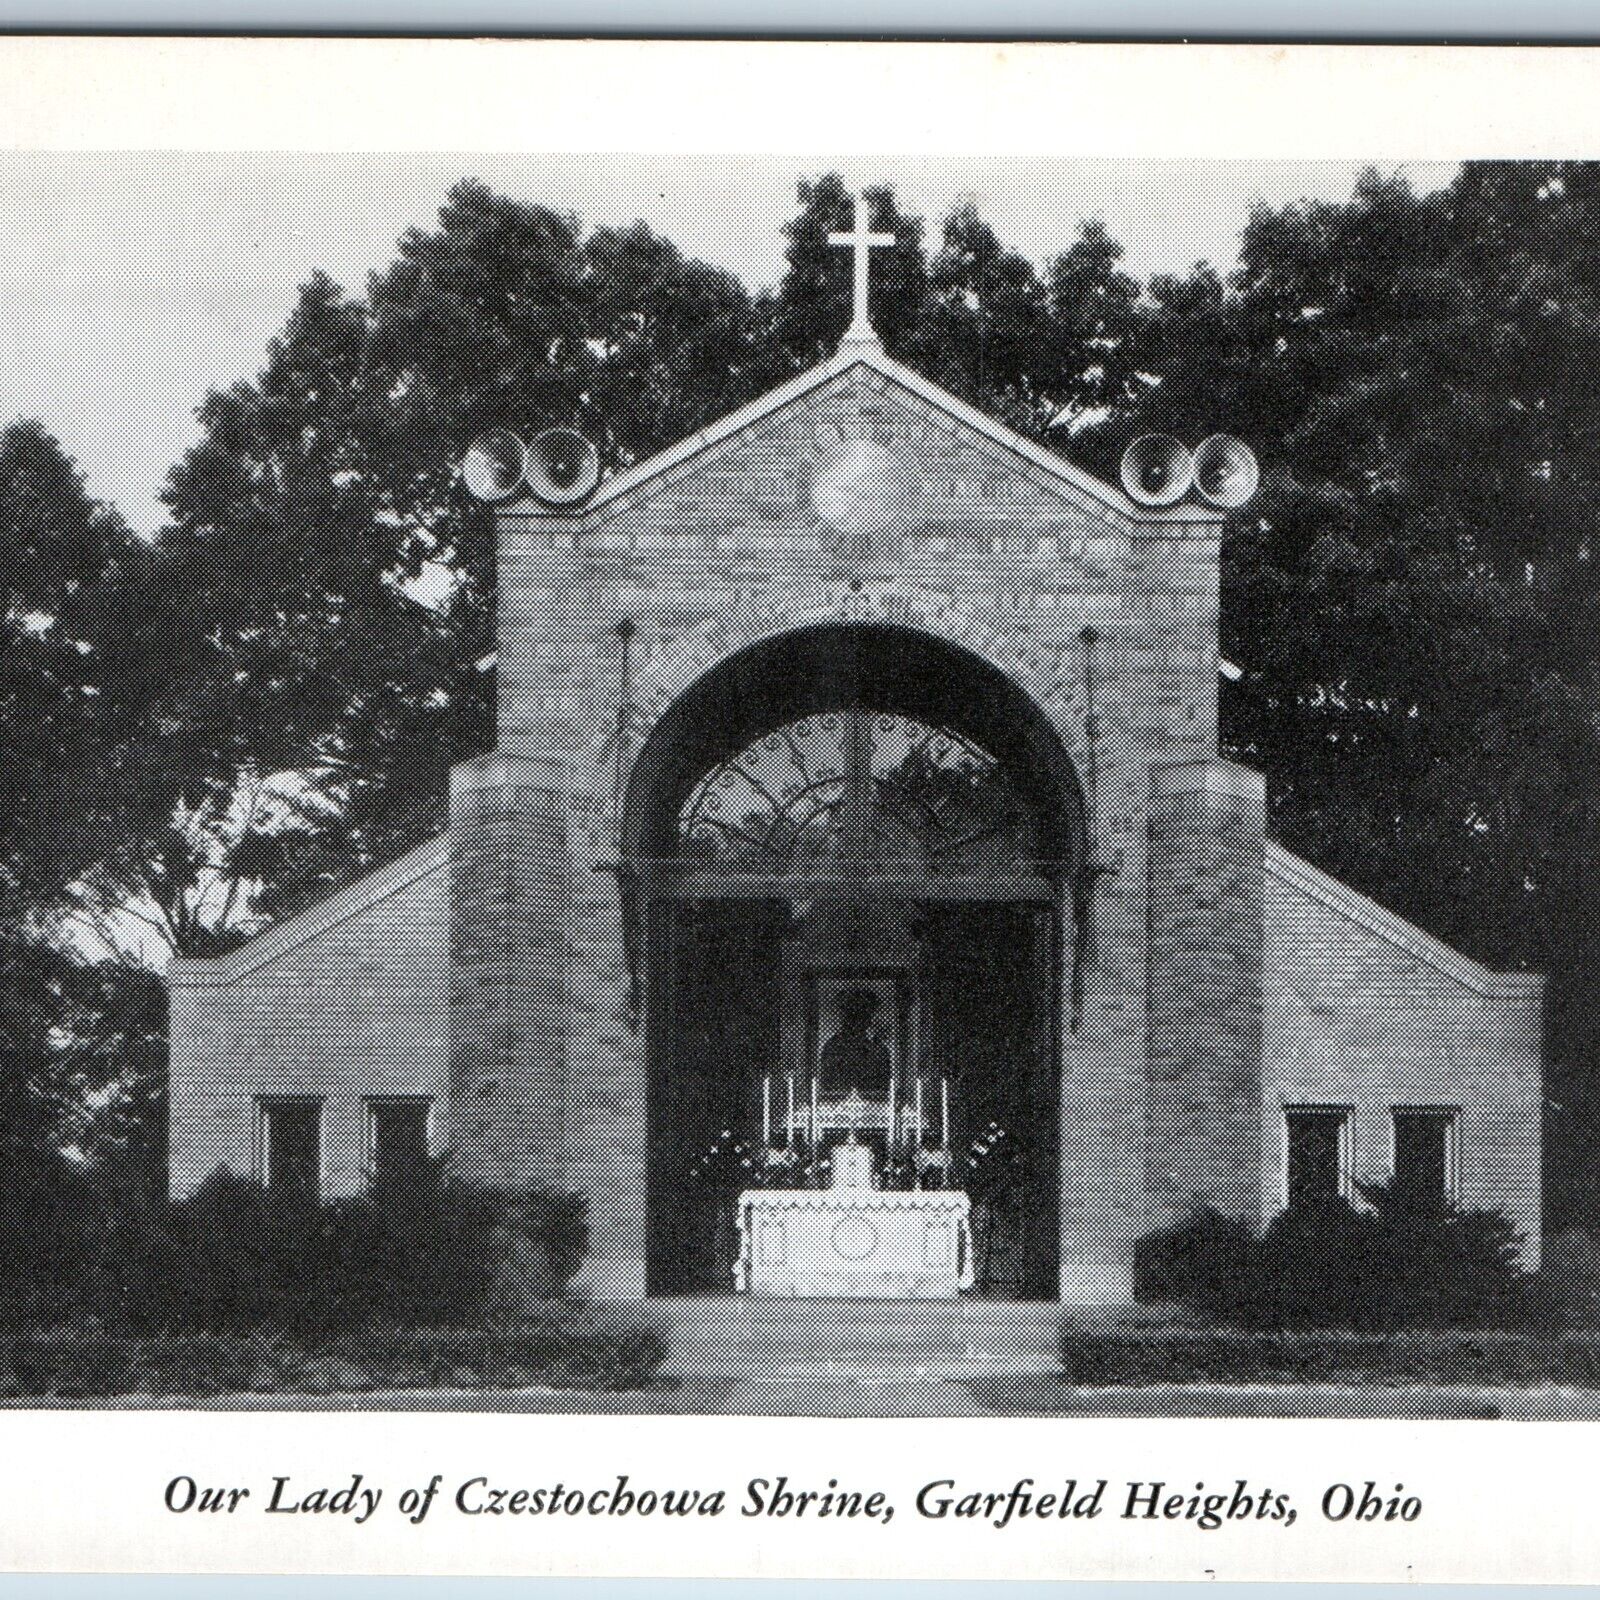 c1950s Garfield Heights, OH Our Lady of Czestochowa Shrines Sacred Geometry A201